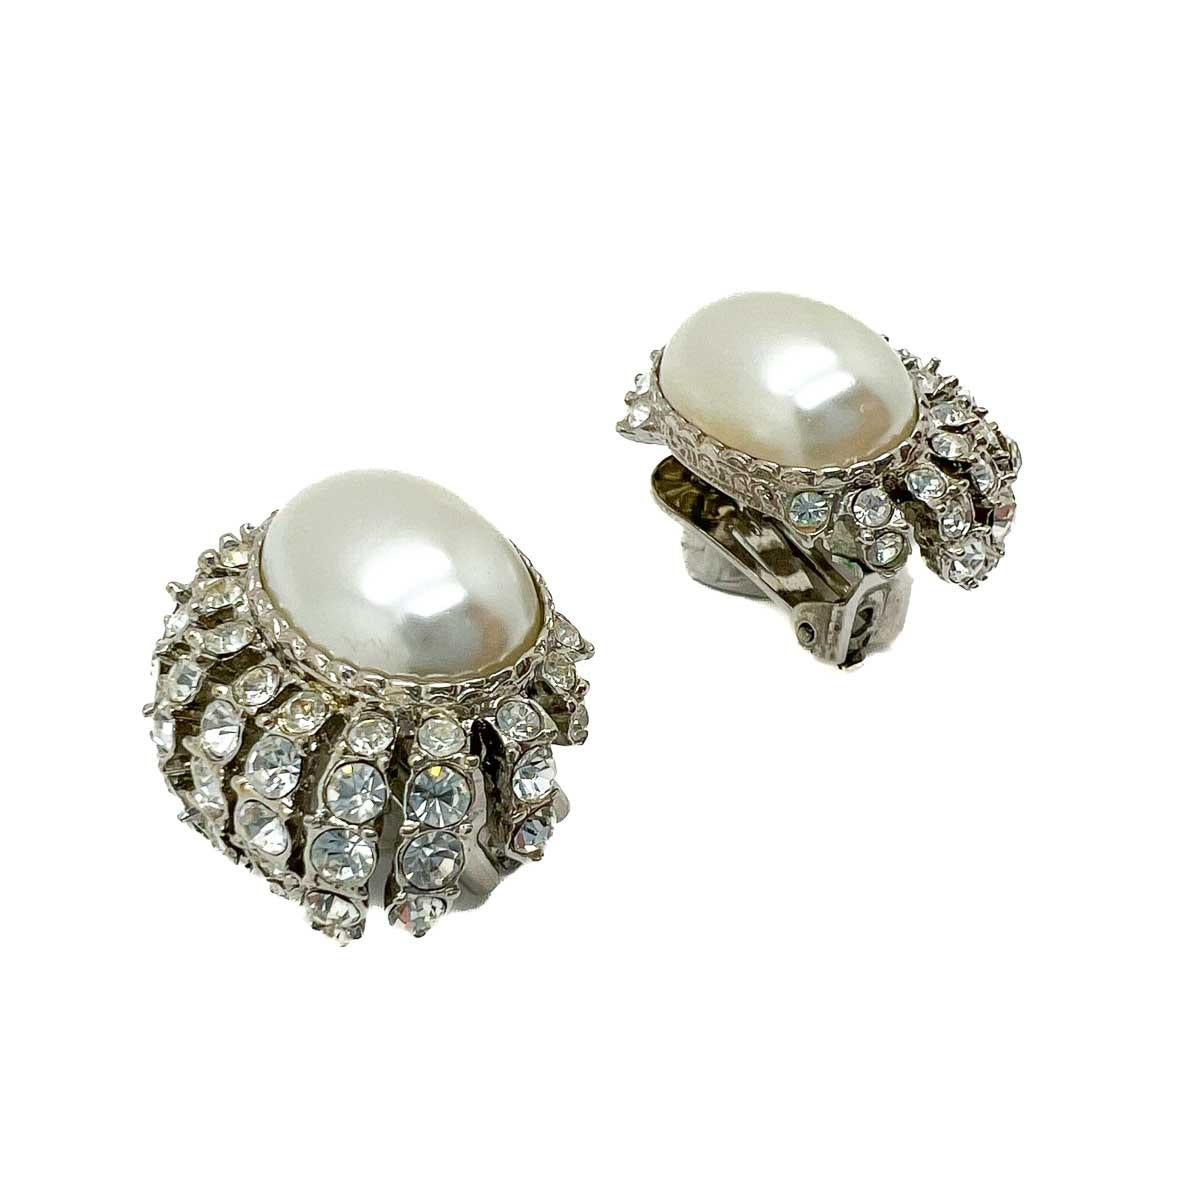 A pair of eternally chic Vintage Kenneth Jay Lane Mabe Pearl Earrings. Inspired by the fine jewels of the Art Deco era the earrings ooze style and class and cleverly emulate the ultimate combination of platinum, diamonds and pearls. Certain to